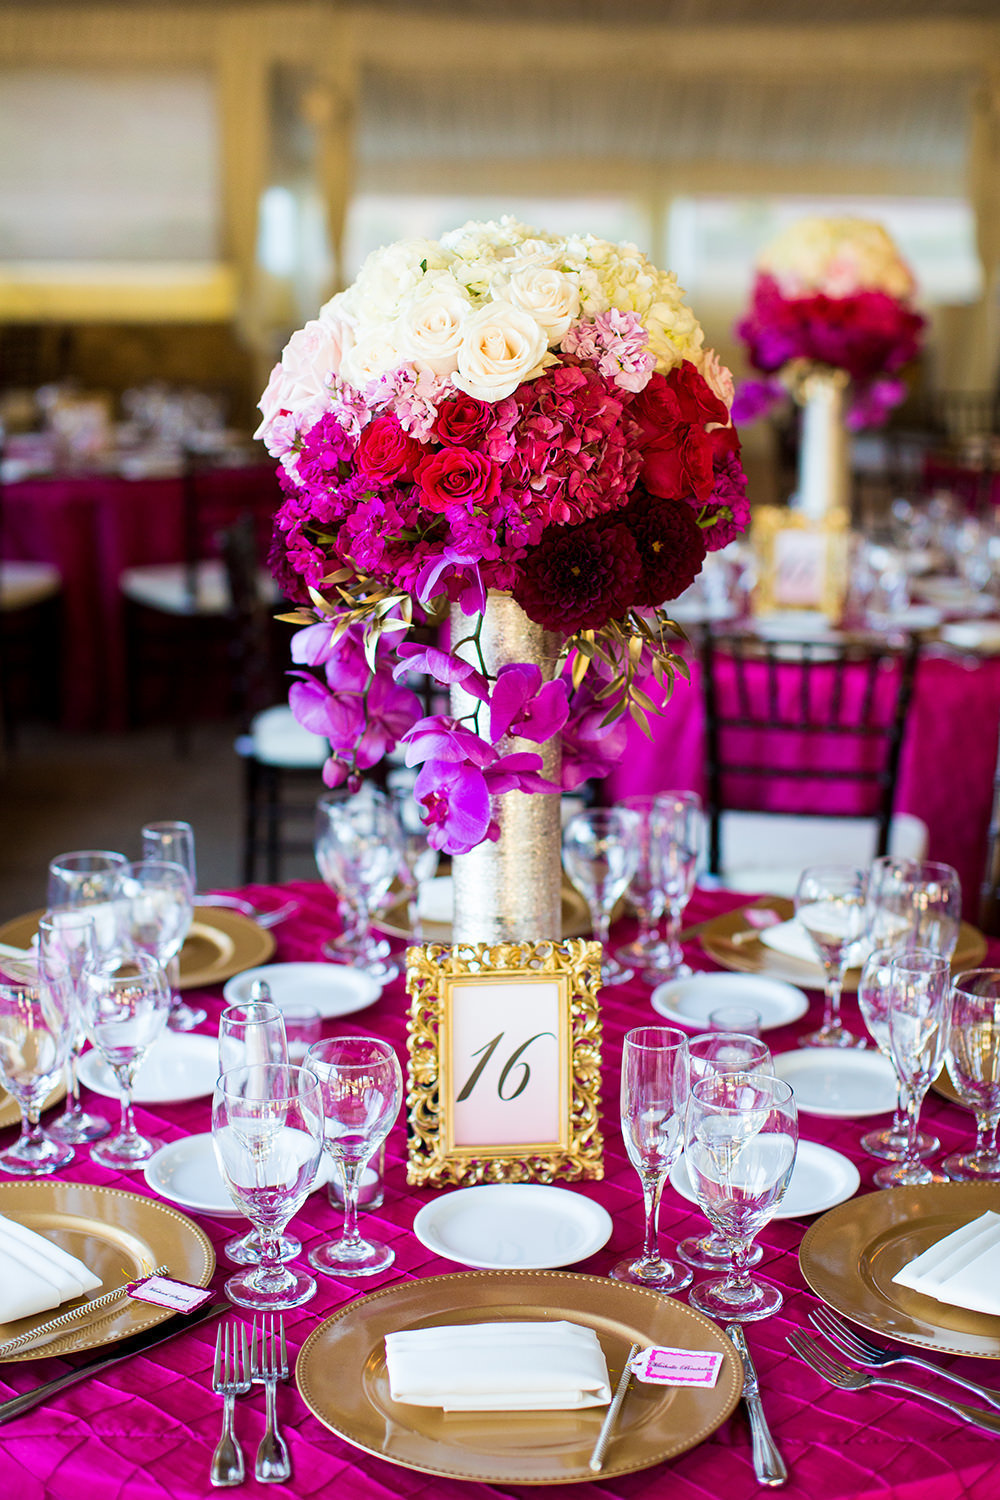 amazing centerpieces with pink white and blush flowers